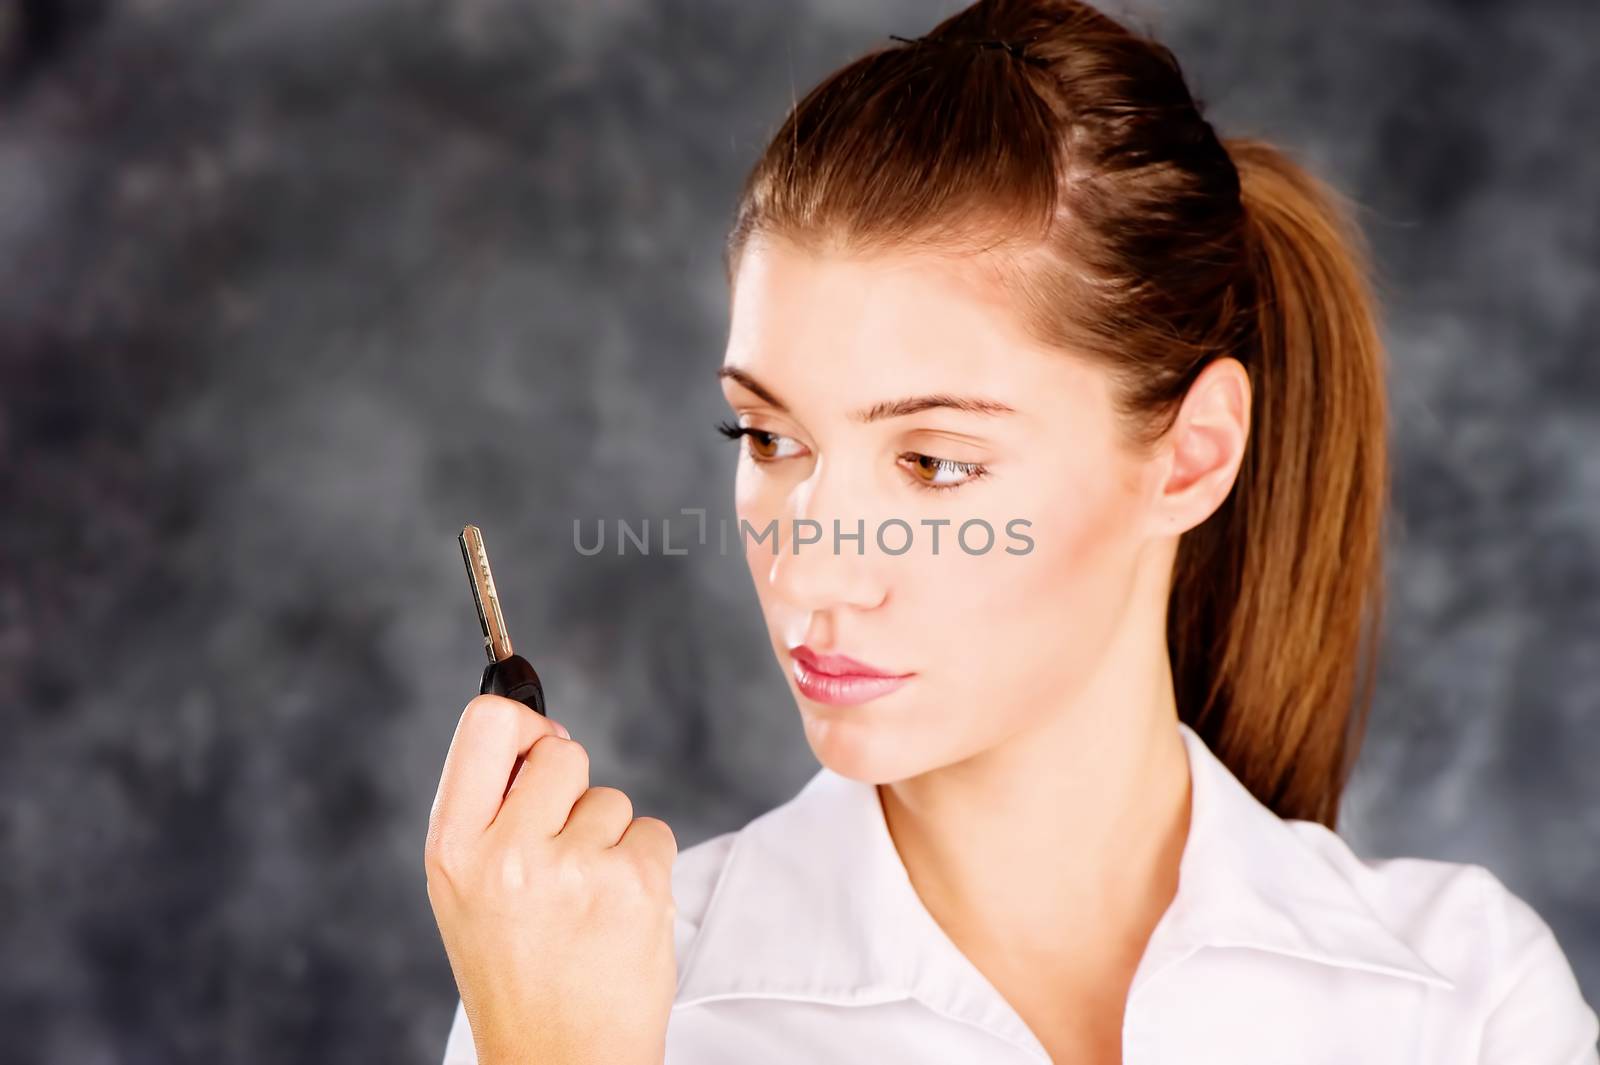 Pretty brown eye brunette looking at a key in her right hand, wearing white blouse. Focus on key